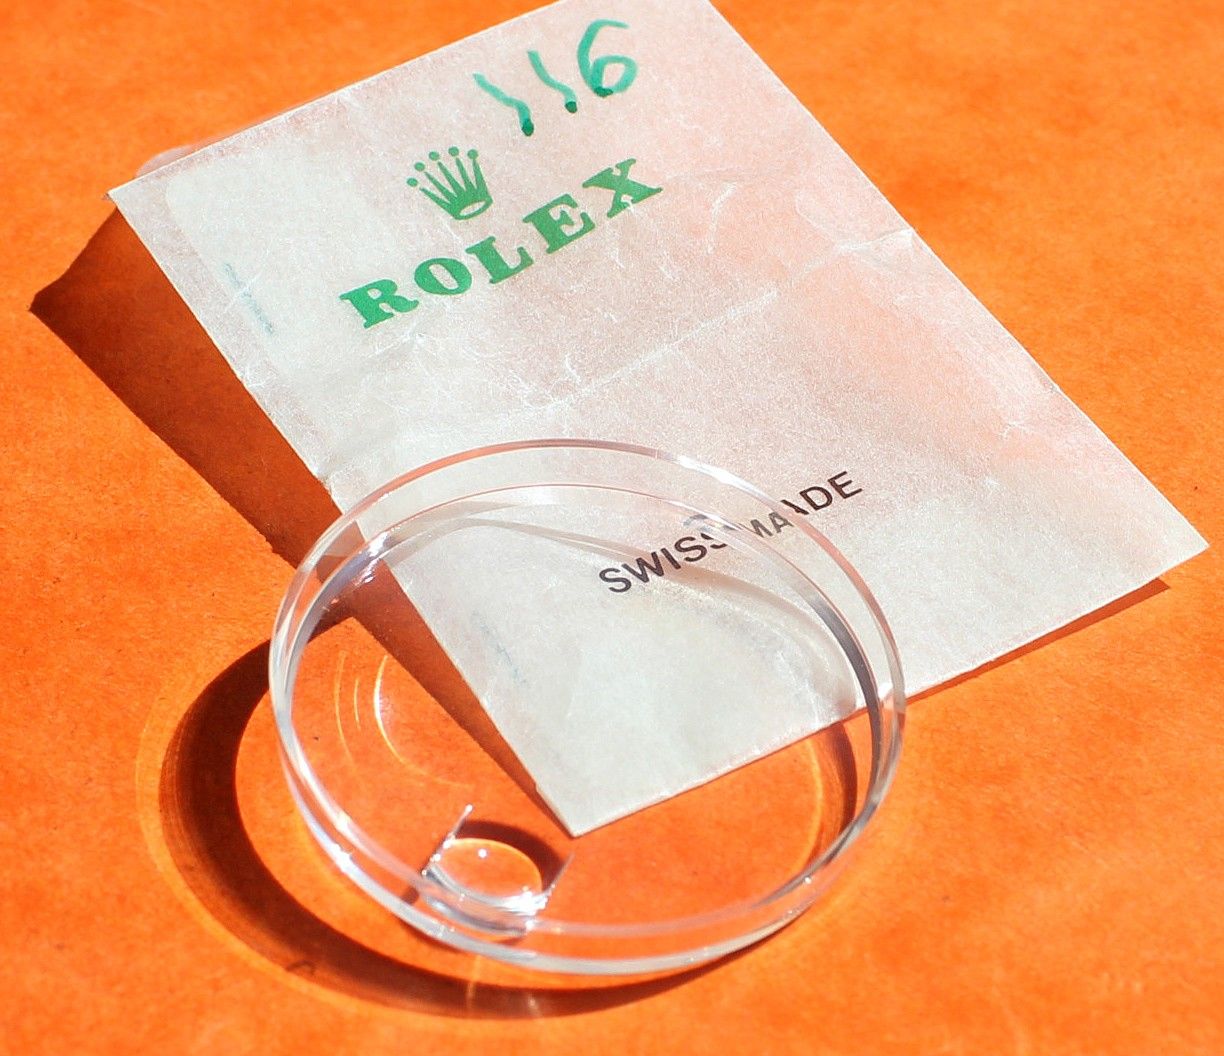 Rolex NOS Cyclop Genuine Oyster Factory ref 116, 6542, 1675, 16753, 16758, 16750, 1655 GMT, explorer watches Plexi Crystal